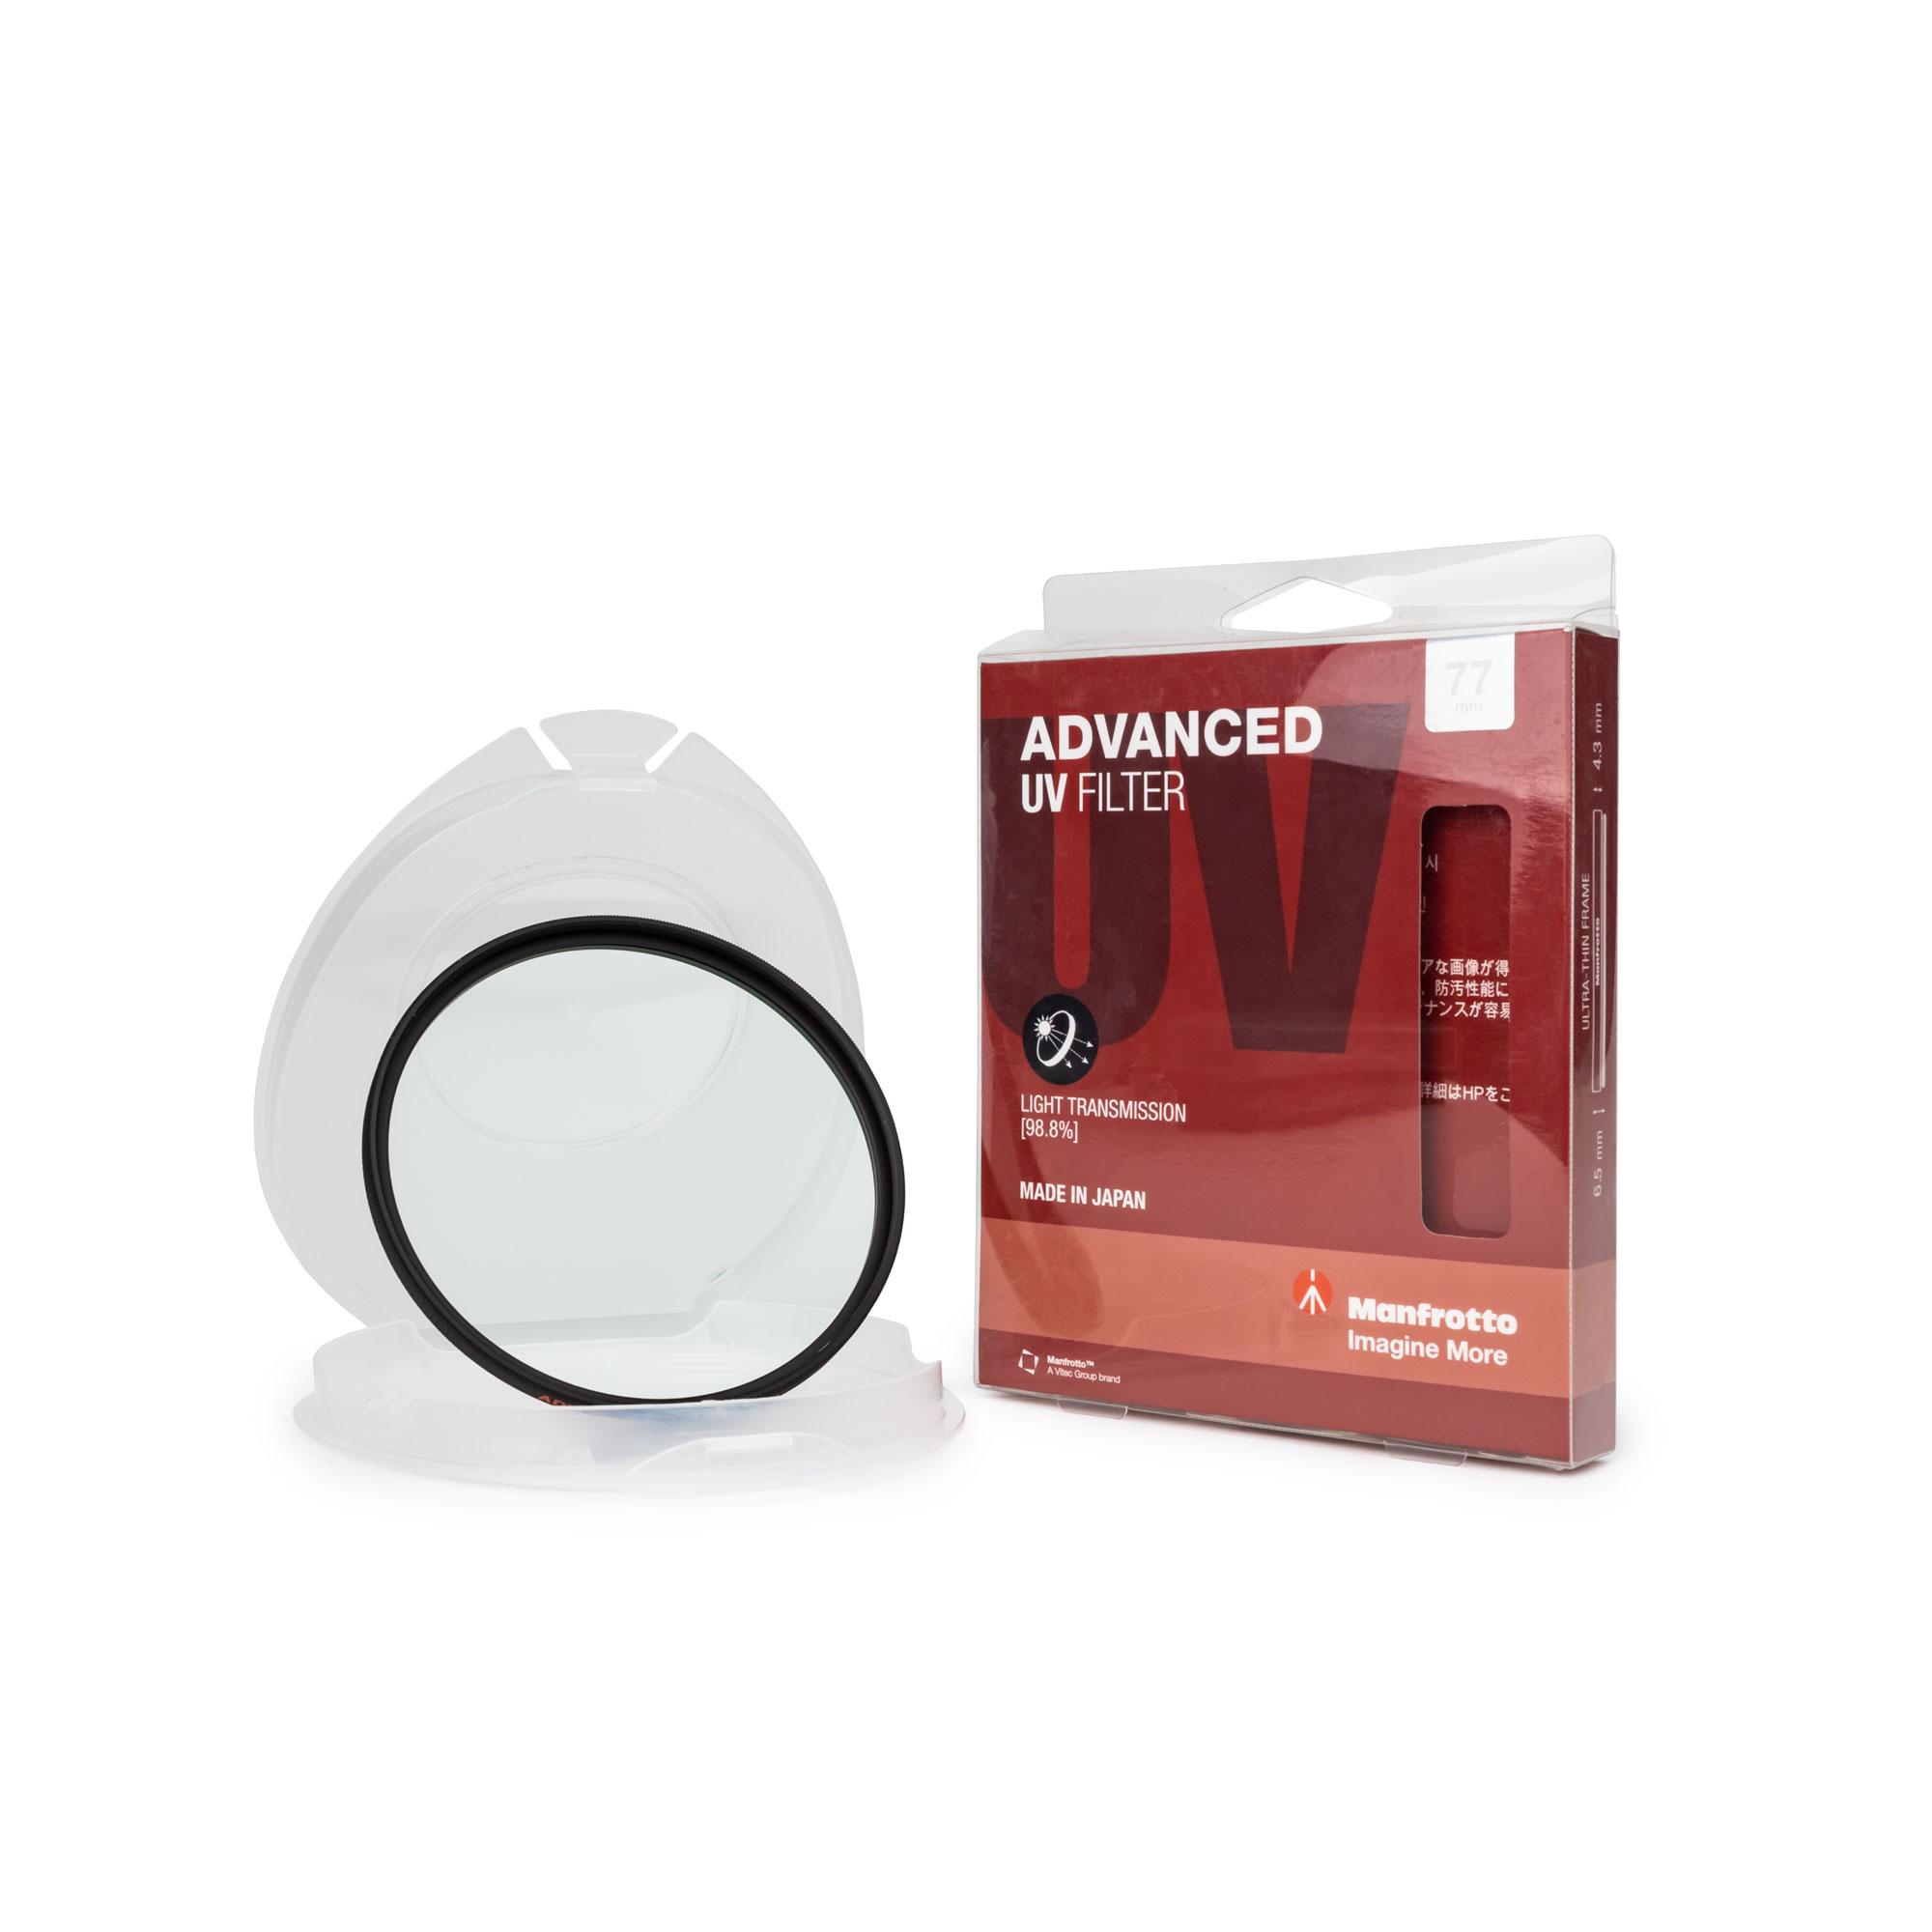 Manfrotto Advanced UV Filter - Auswahl: Manfrotto Advanced UV Filter 72 mm